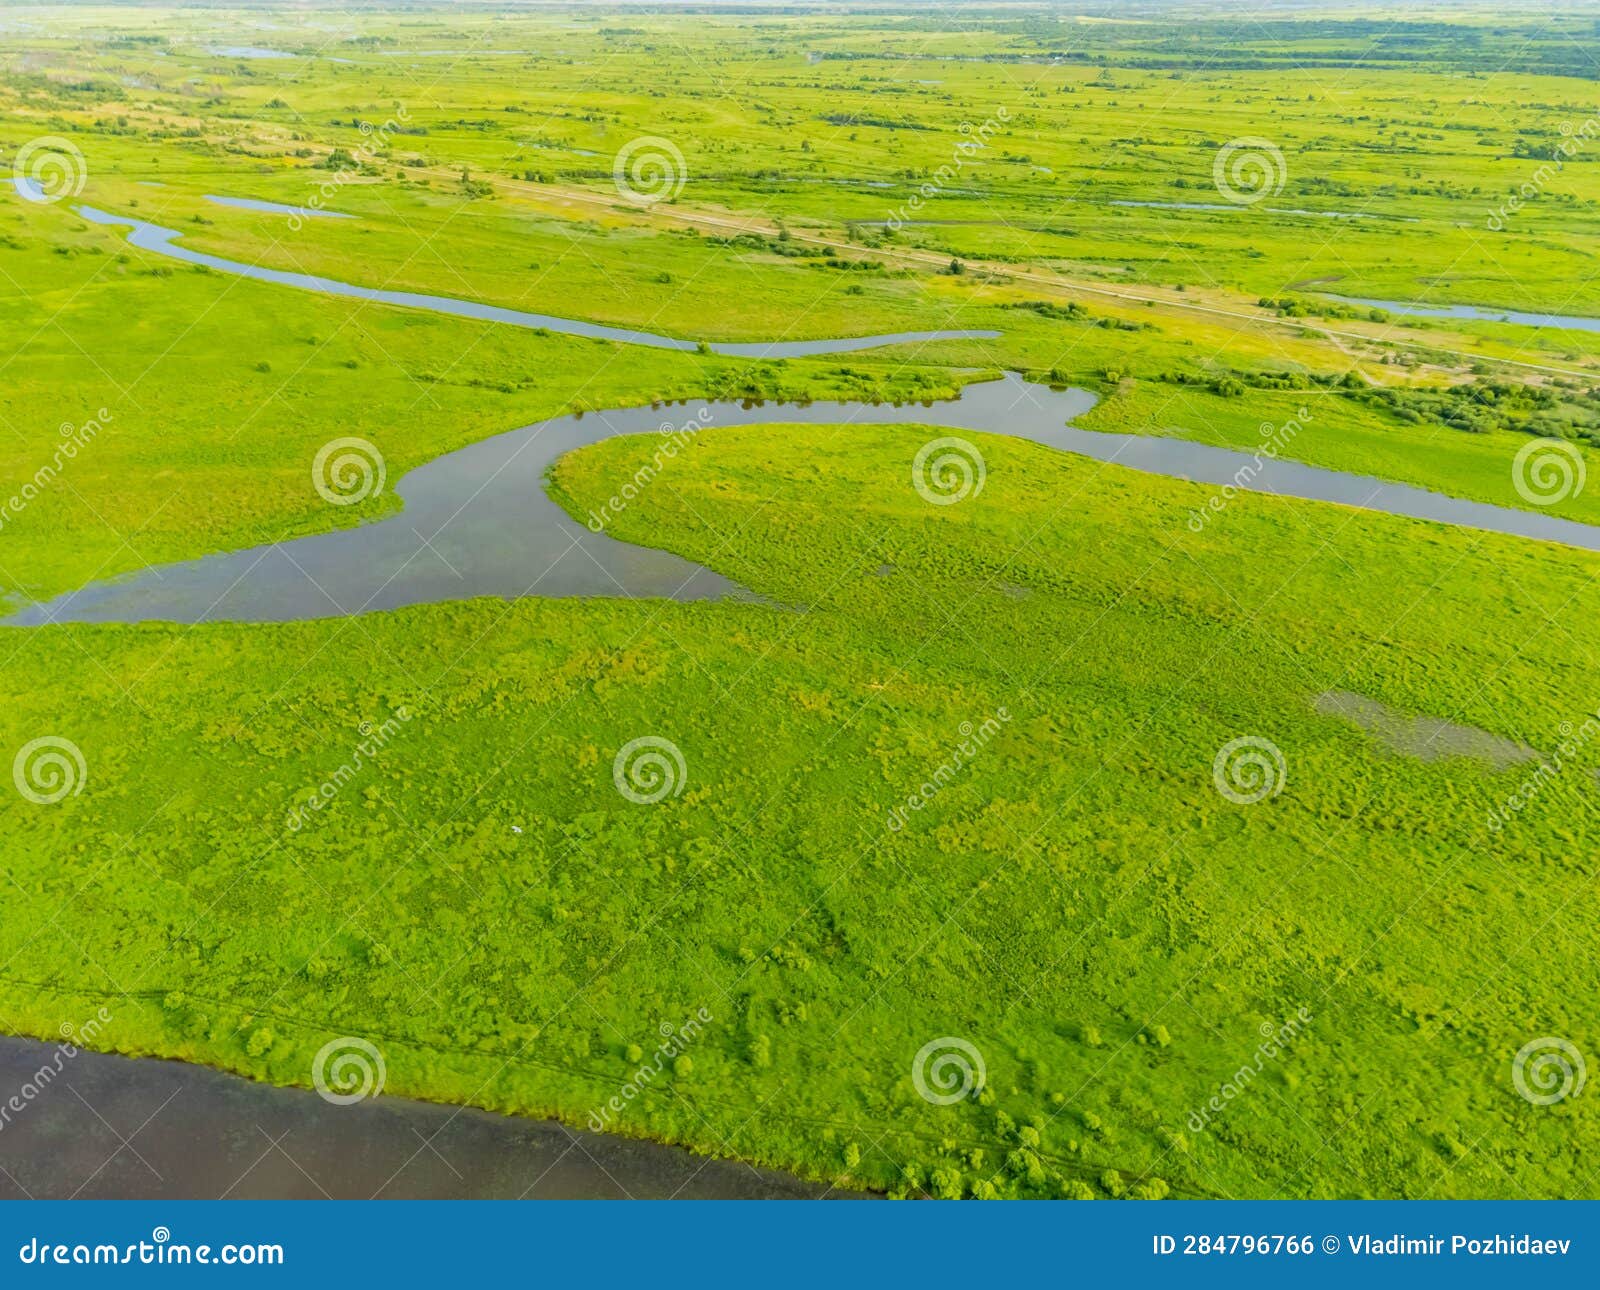 Photos of the River Island Were Taken from a Drone. Stock Photo - Image ...